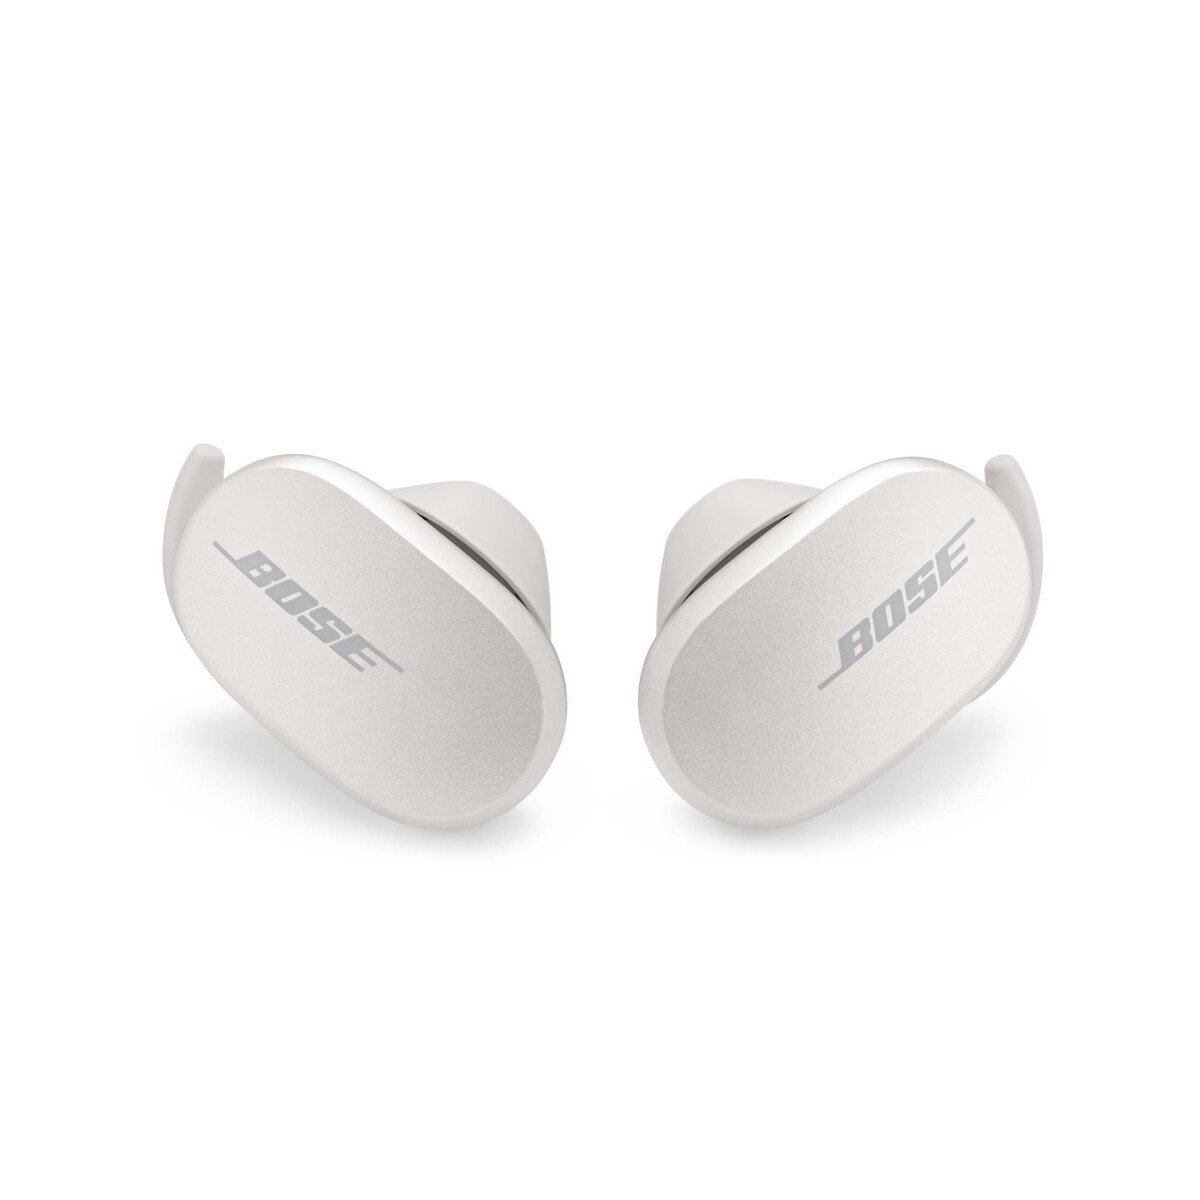 Bose Quiet Comfort Earbuds Soap Stone